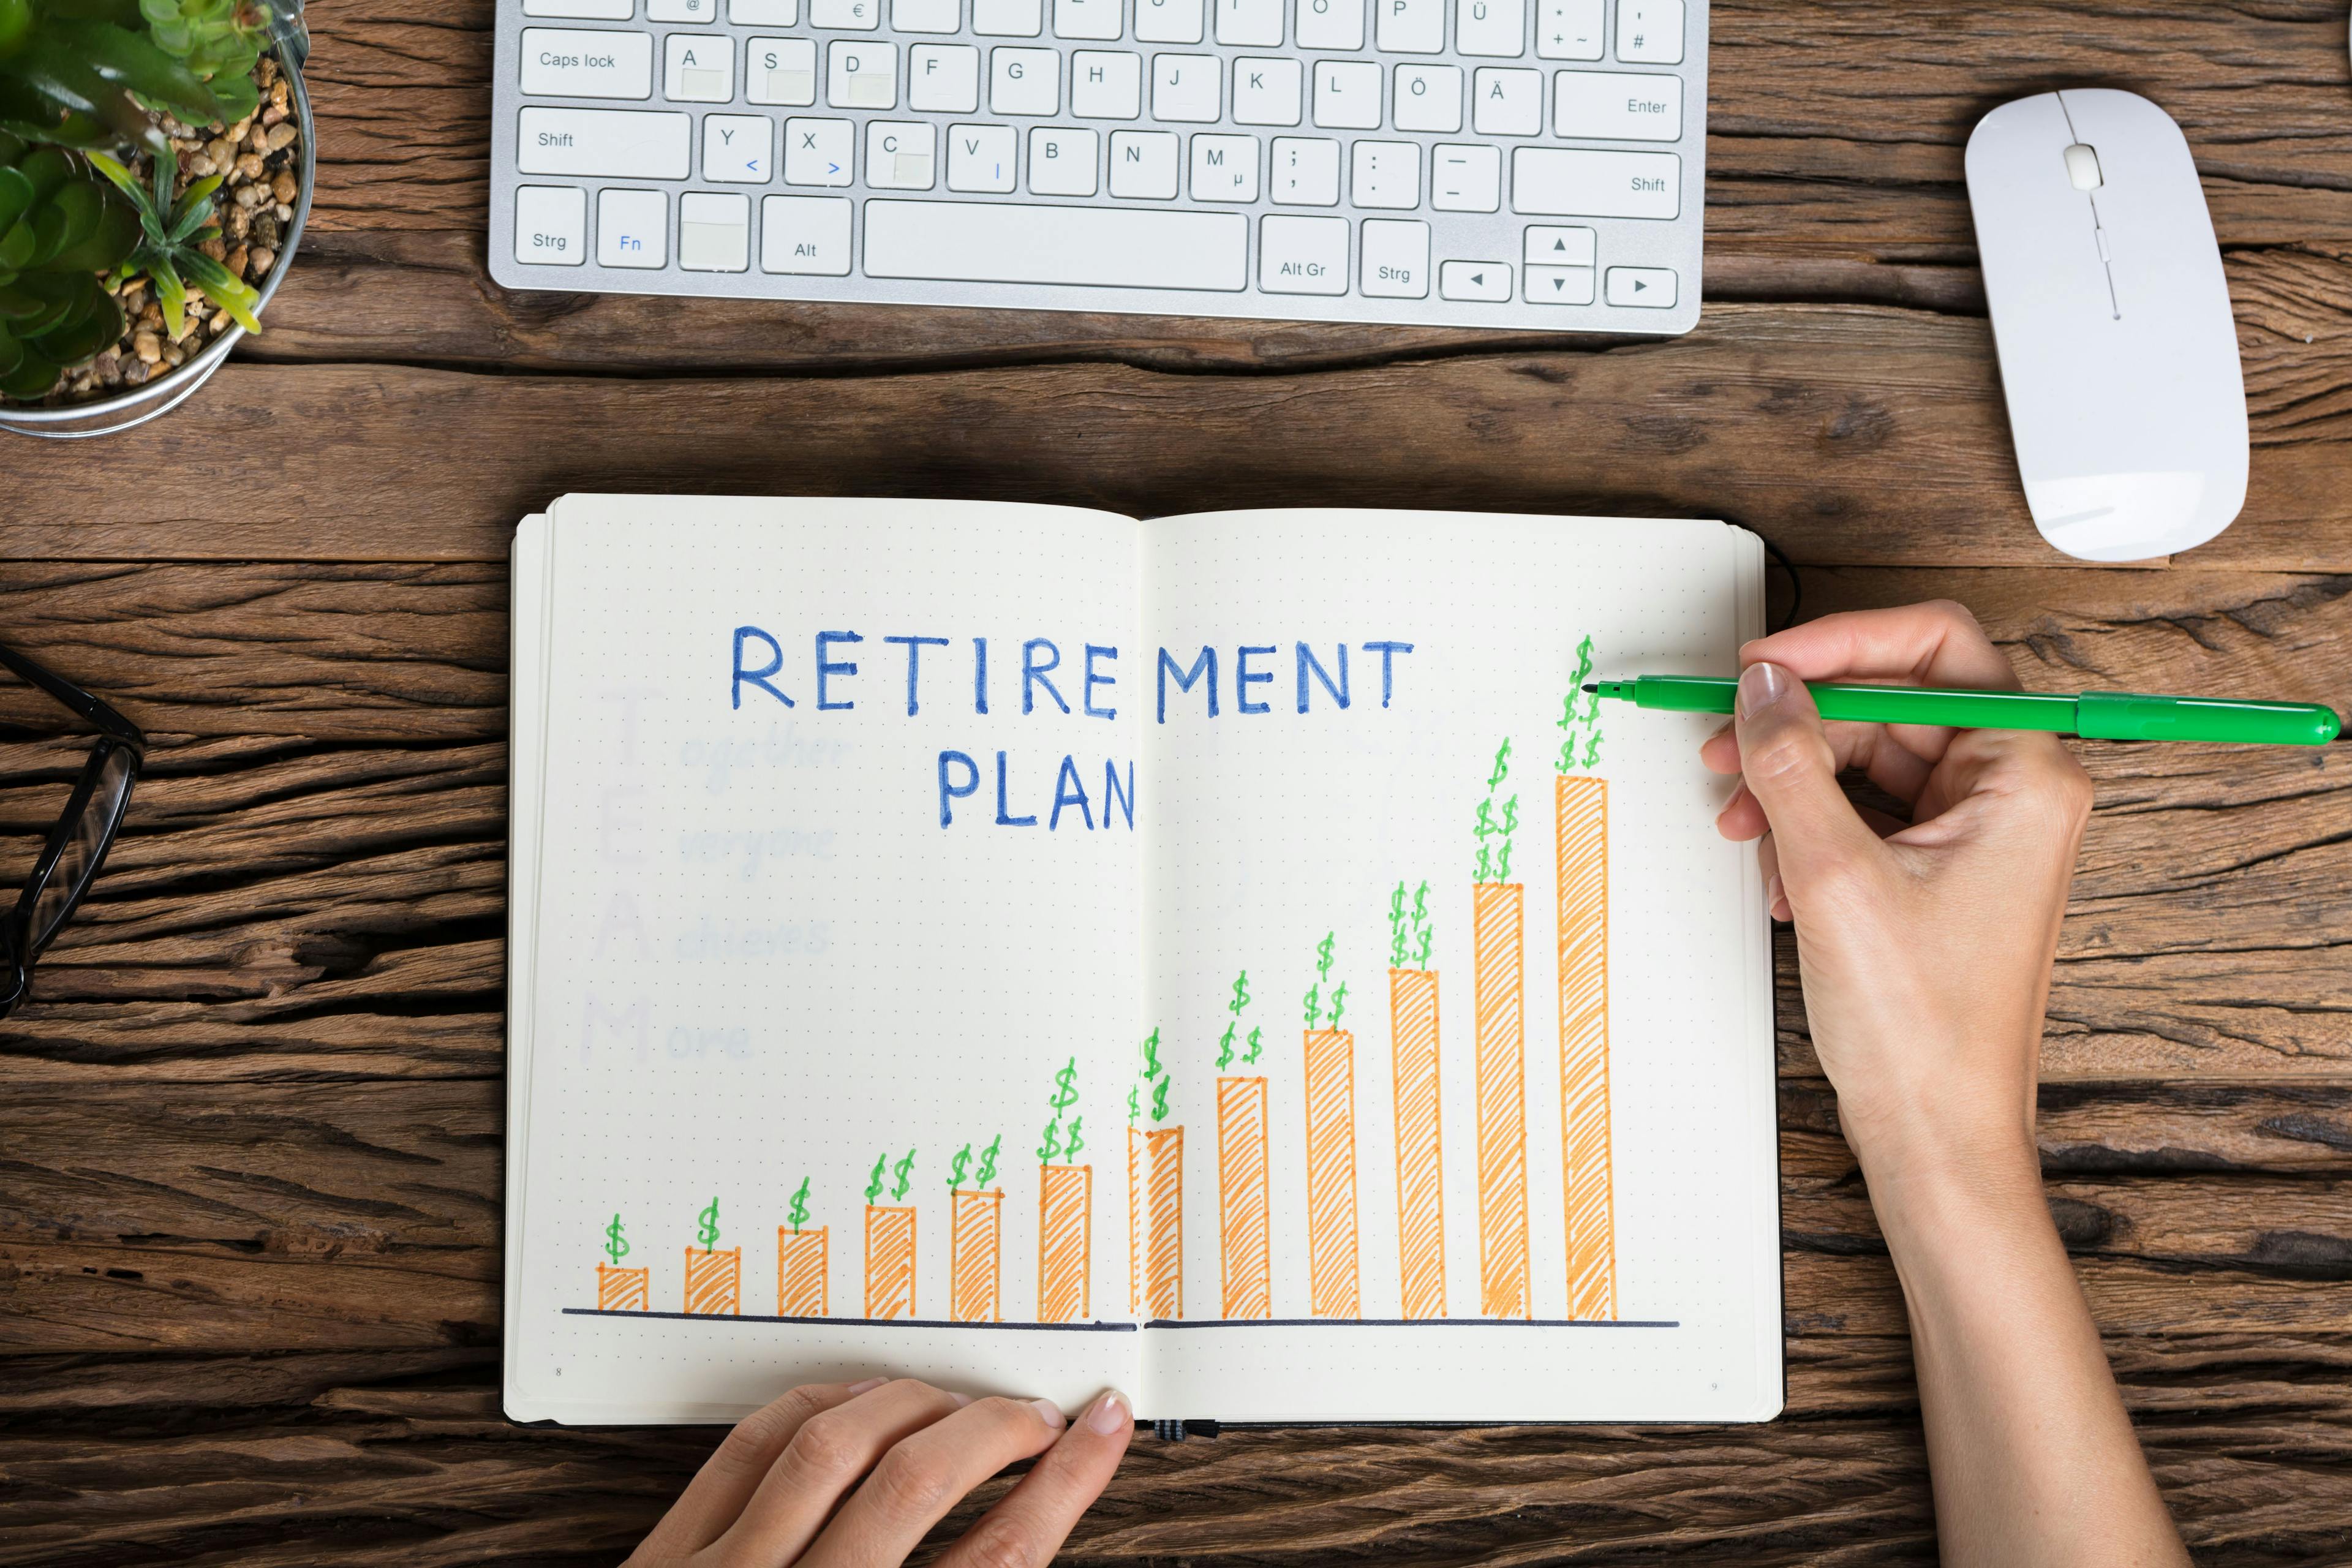 Retirement planning and the potential 401(k) fallacy